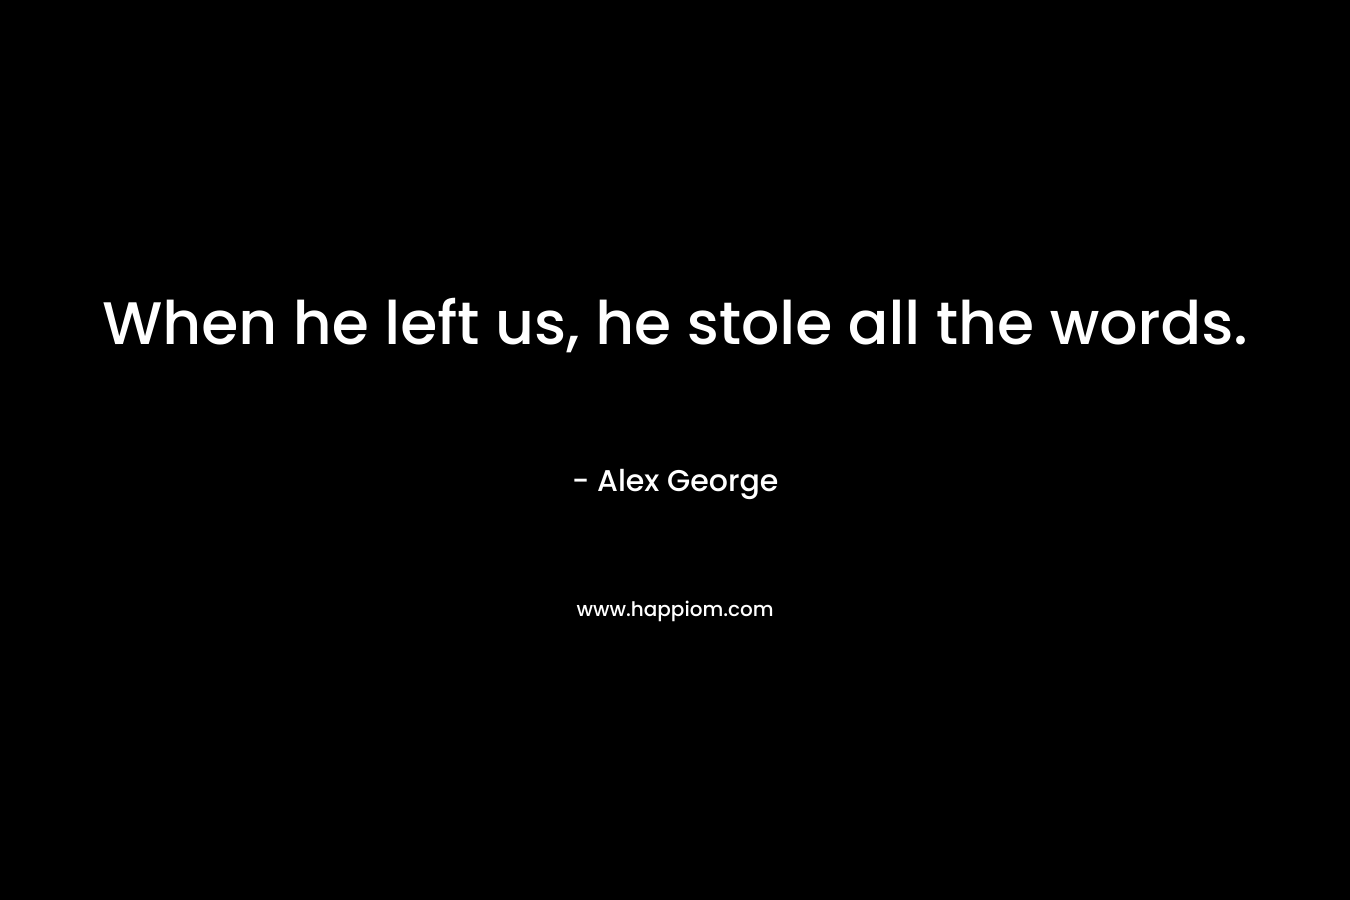 When he left us, he stole all the words. – Alex George